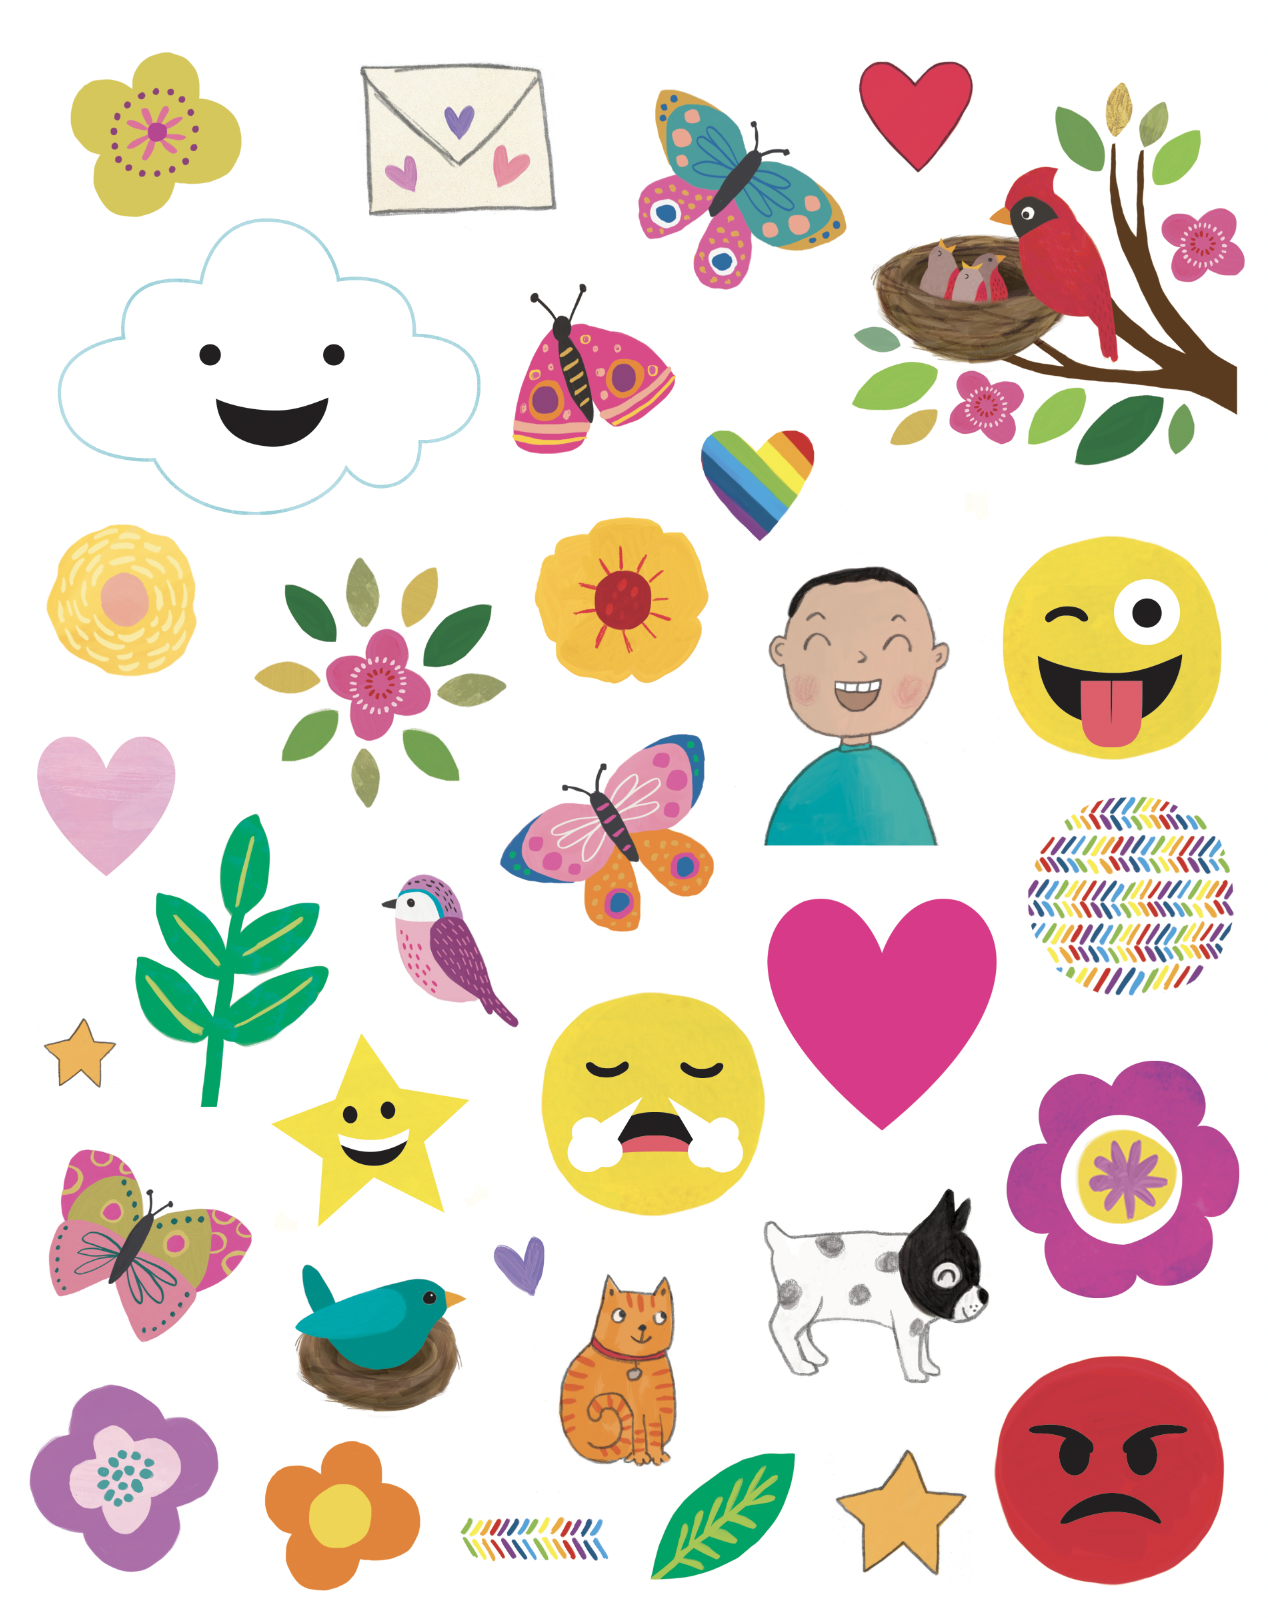 ILoveYouNearAndFar-activity-book-by-Bloomsbury-sticker-sheet-stickers-cat-dog-kid-butterfly-cloud-letter-heart-leaf-bird-nest-rainbow-flowers-faces-emotions-by-Lesley-Breen.png